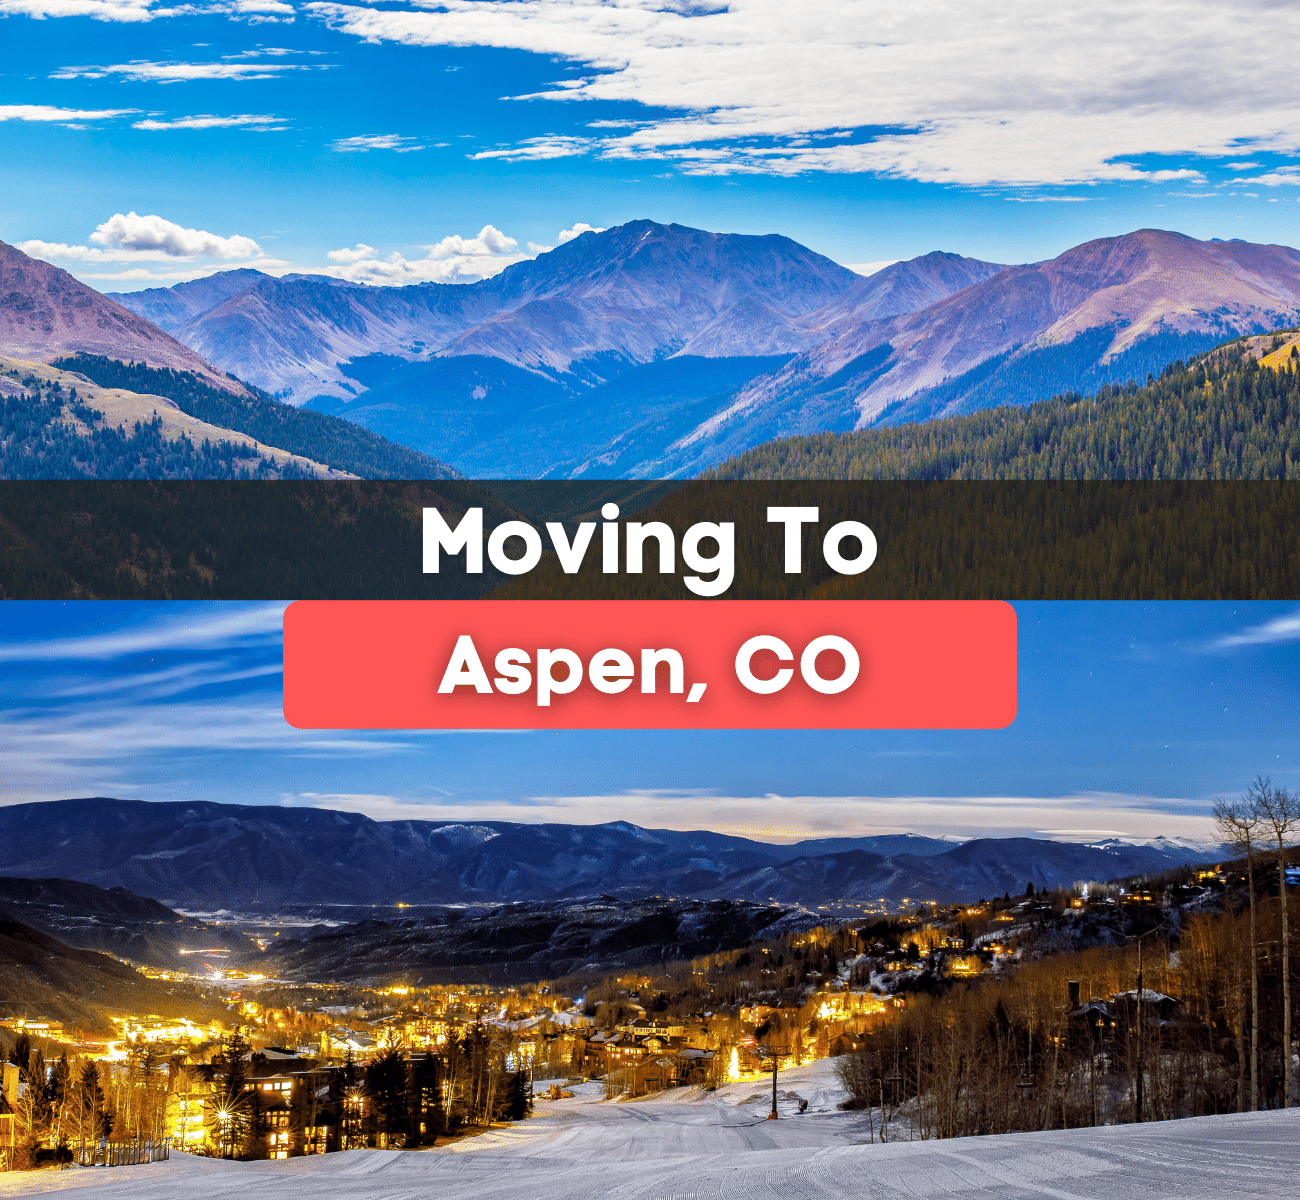 Moving to Aspen, Colorado - What is it like living in Aspen?